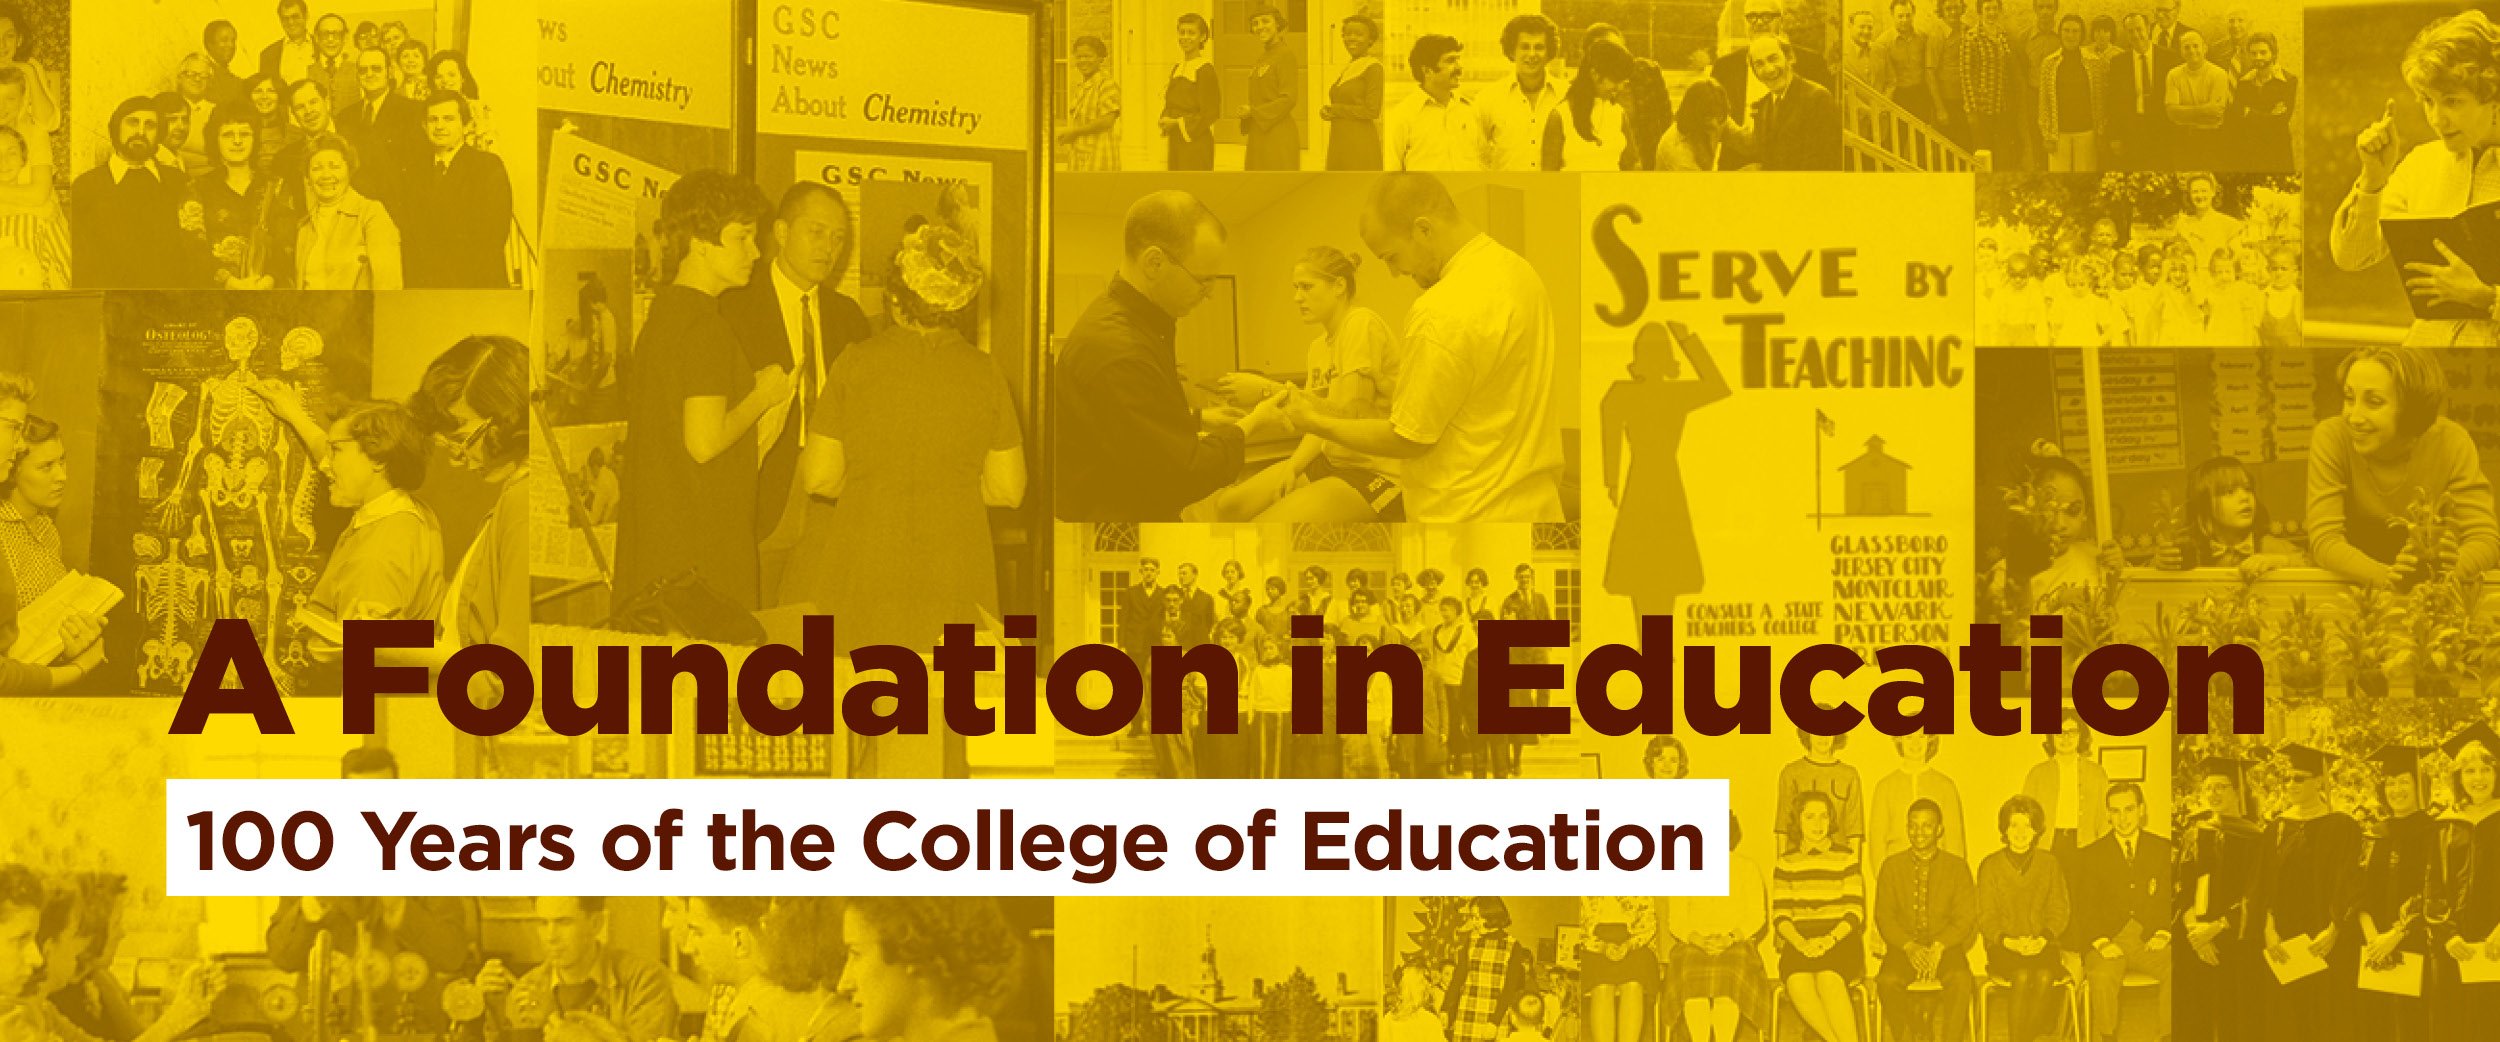 A foundation in education: 100 years of the College of Education